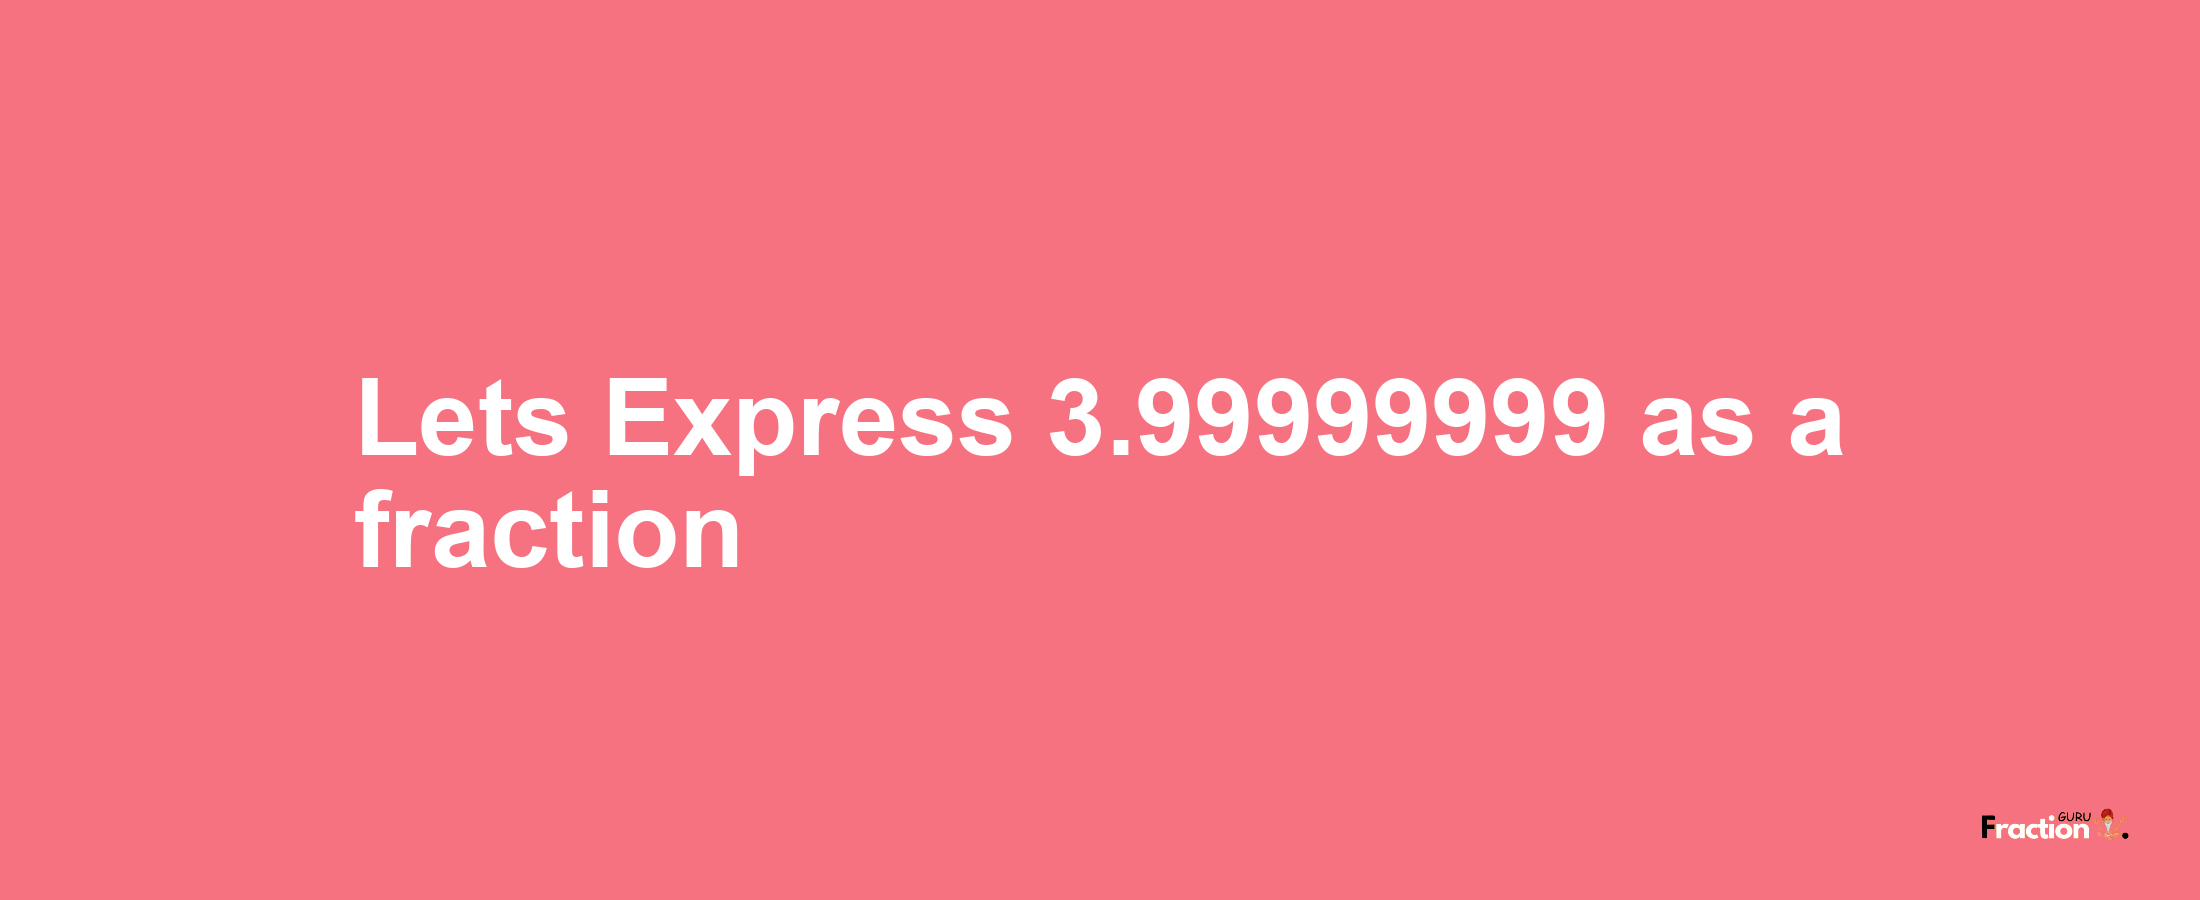 Lets Express 3.99999999 as afraction